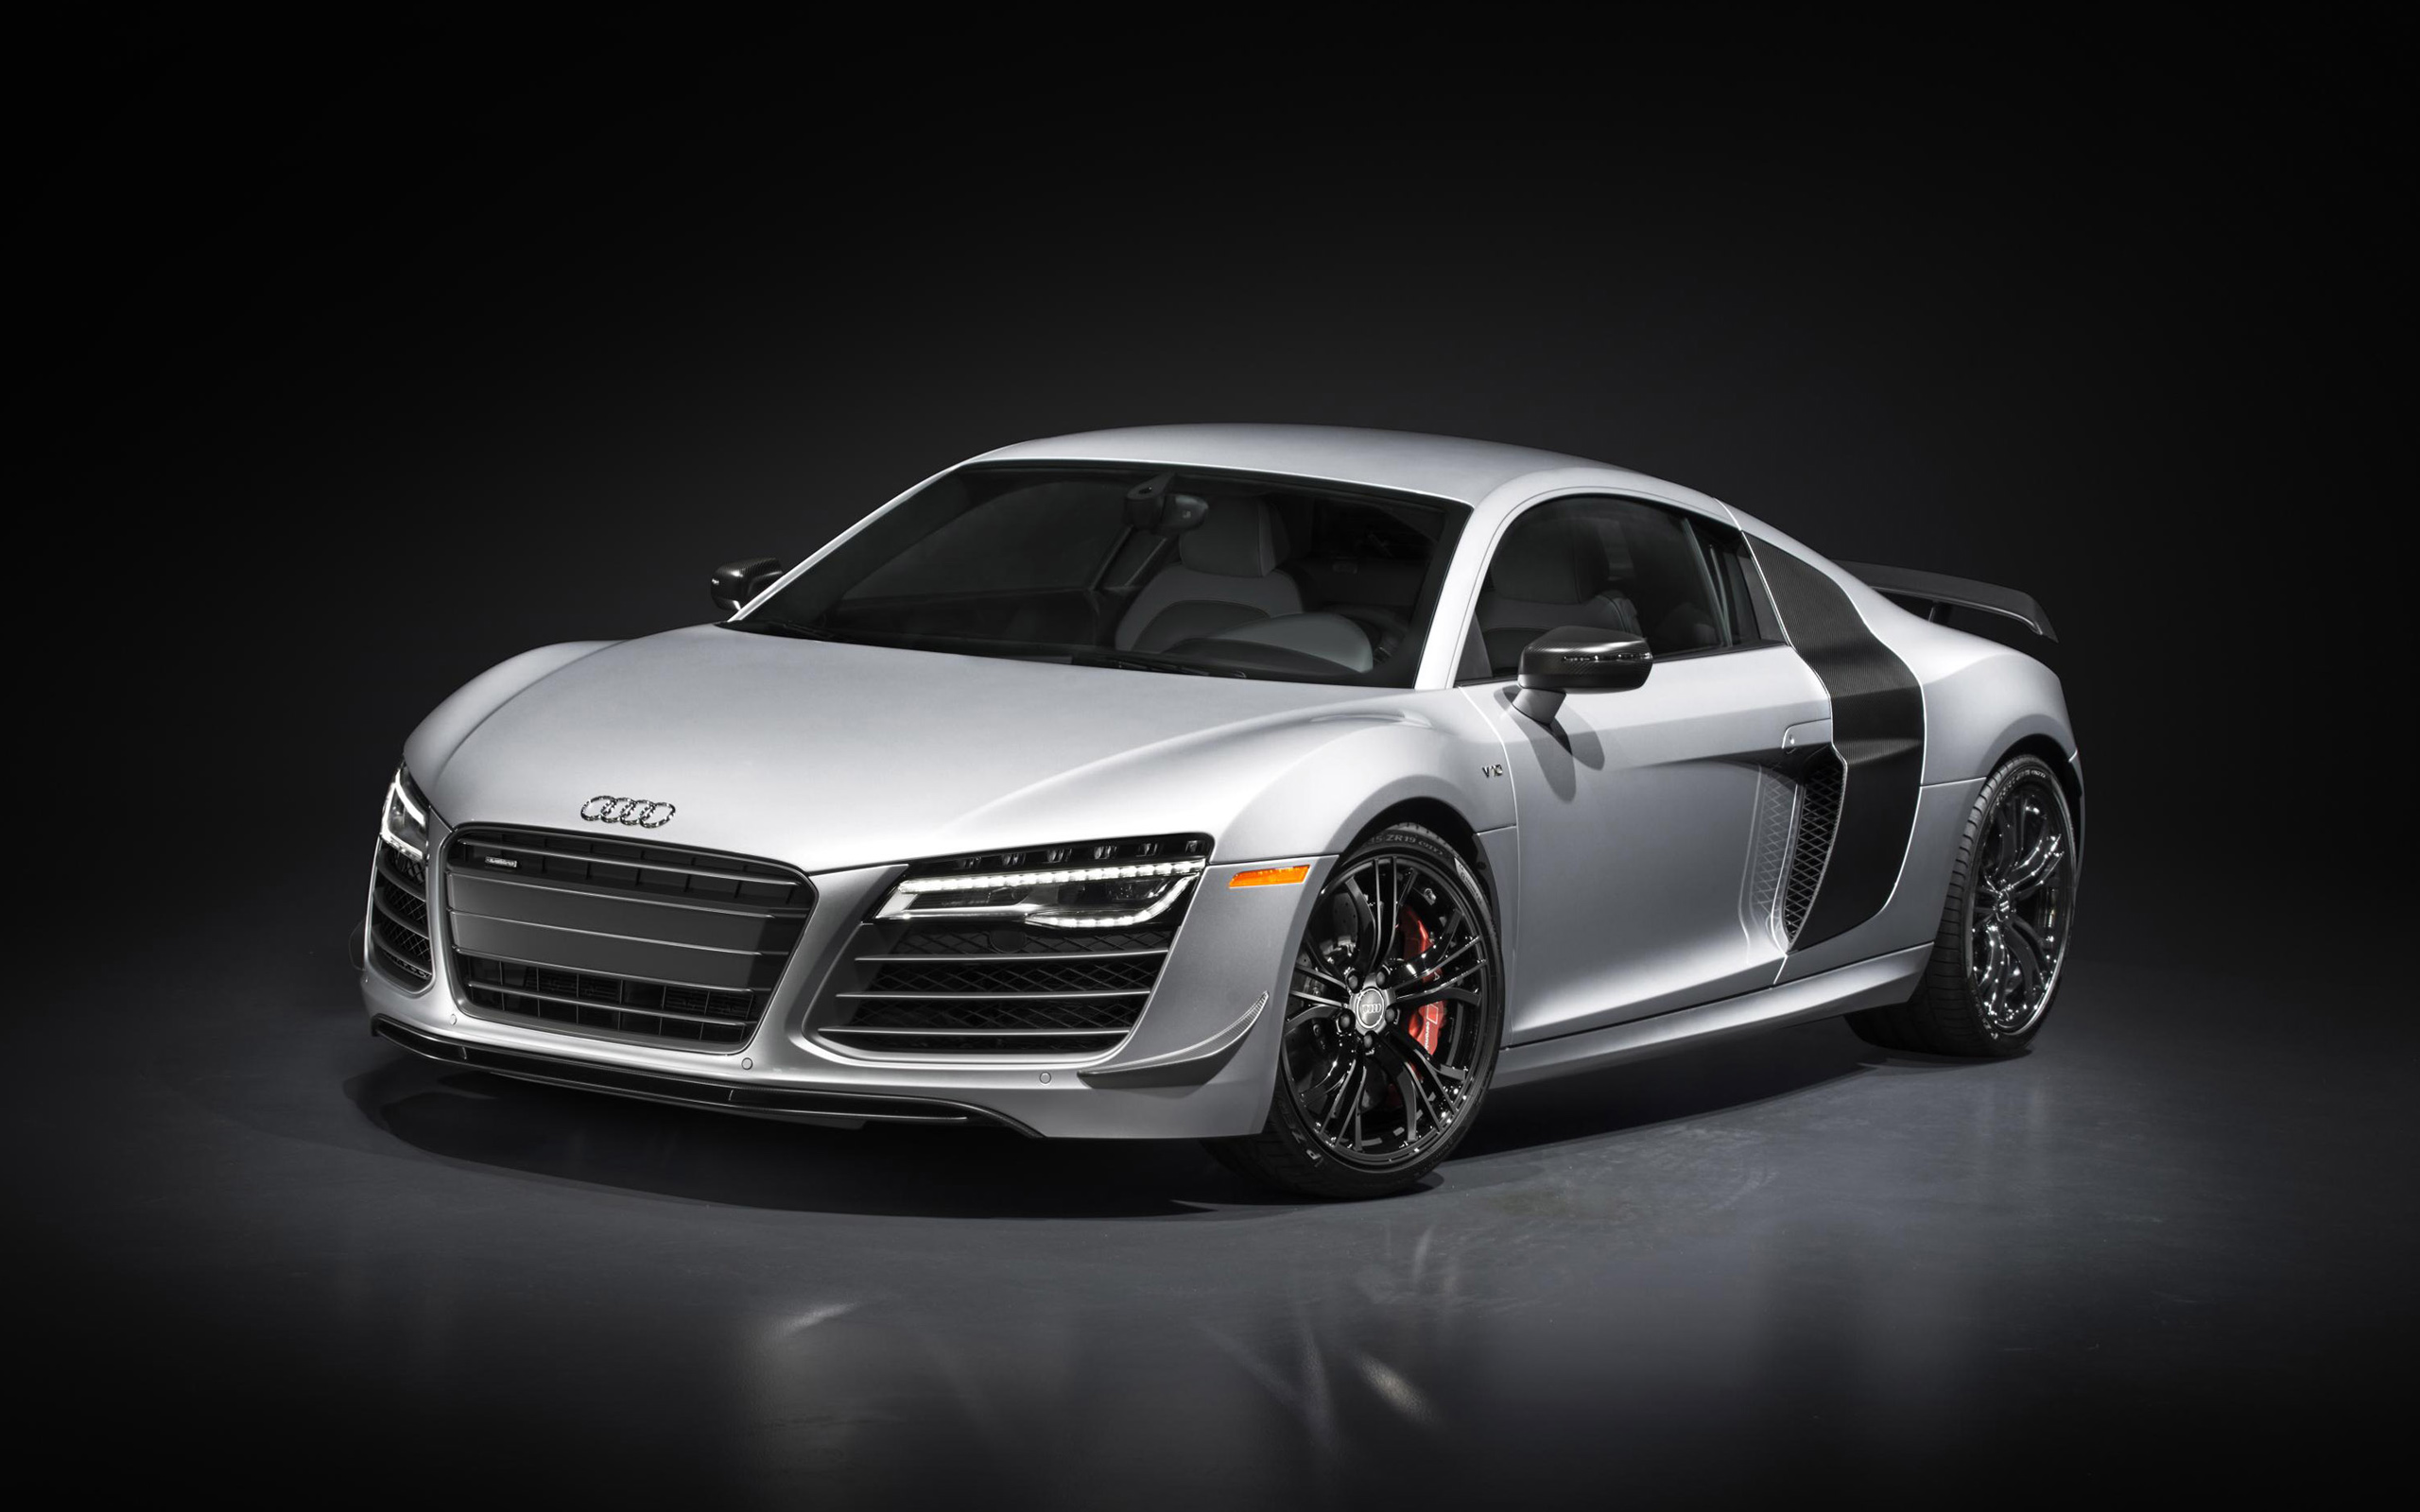 Audi R8 Competition 2015 Wallpapers HD Wallpapers 2560x1600